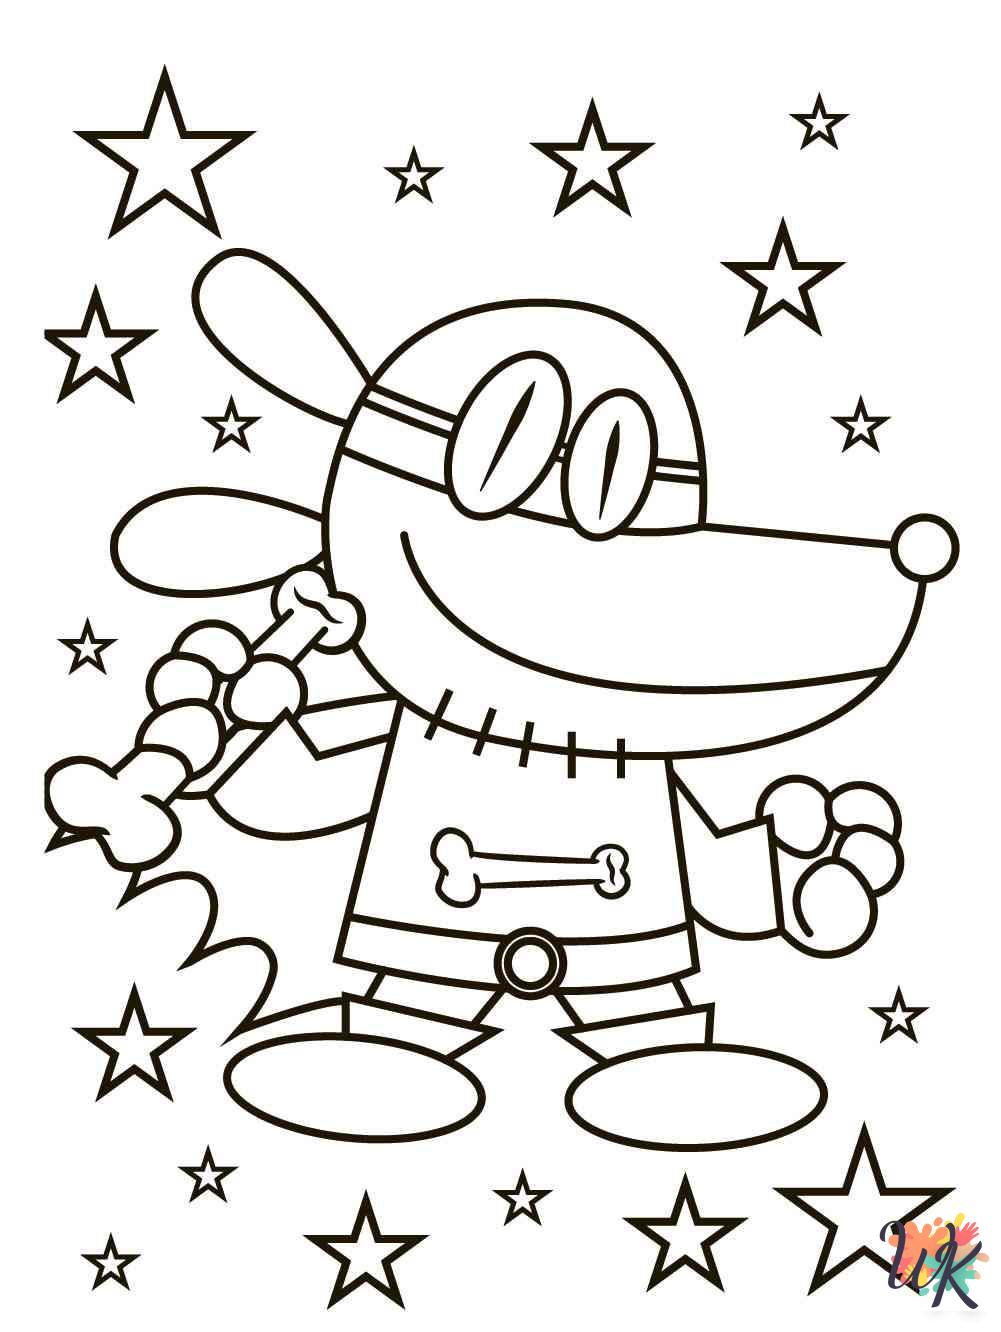 Dog Man ornaments coloring pages